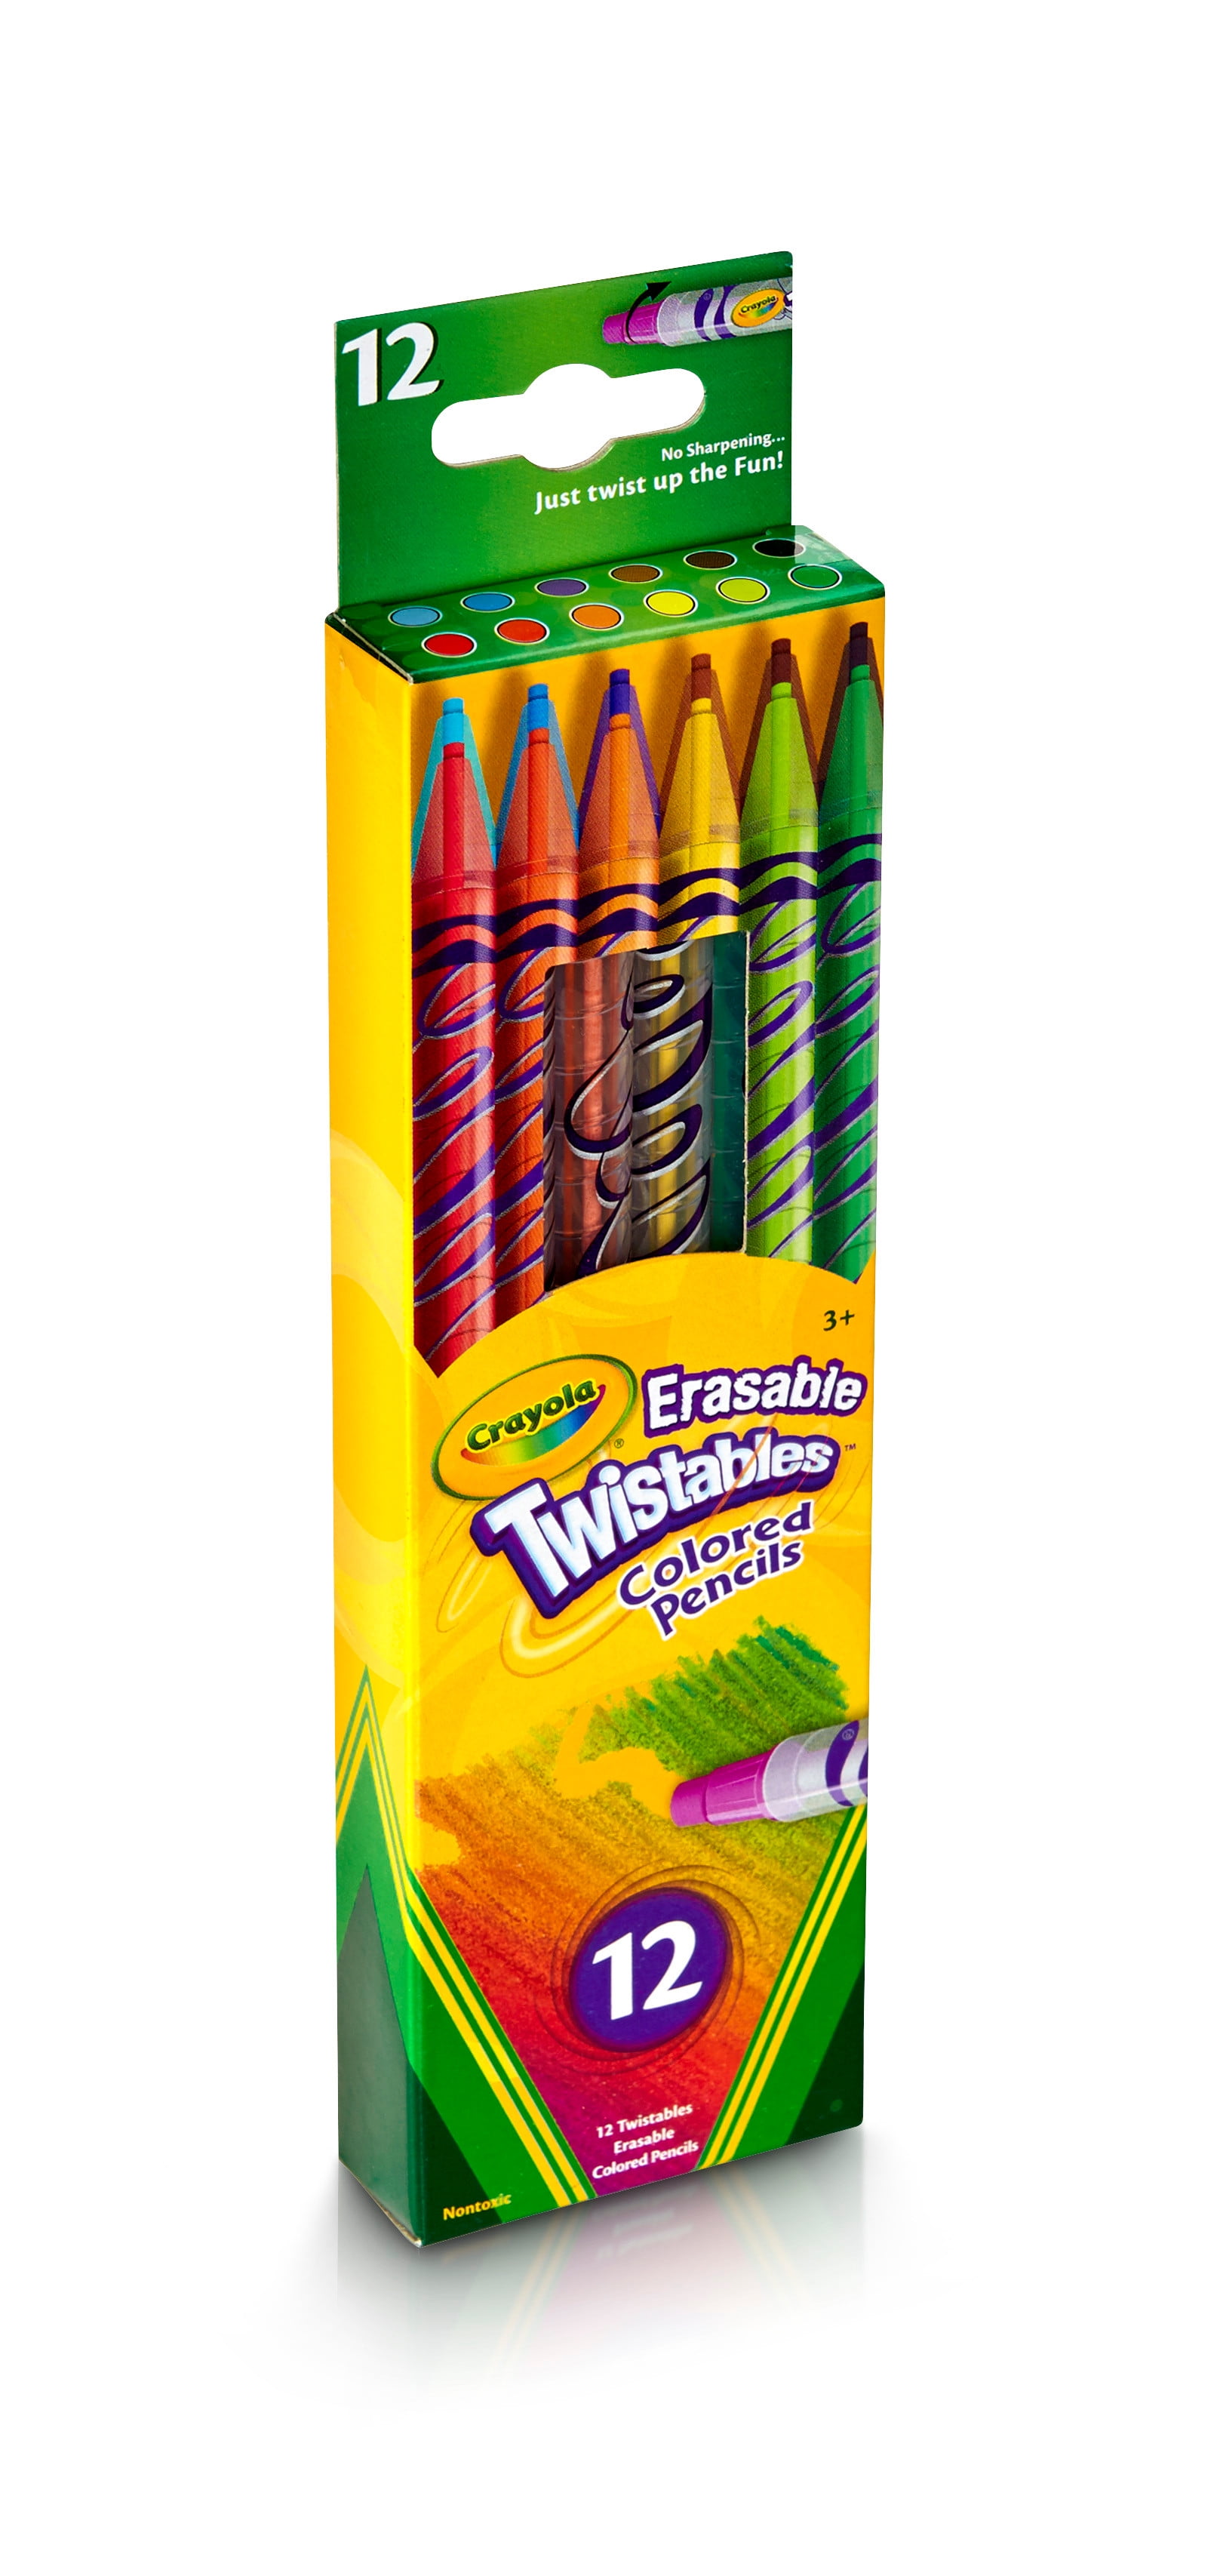 Premier Stationery 51670 World of Colour Twisties Crayon Pack of 24 Multi-Colour